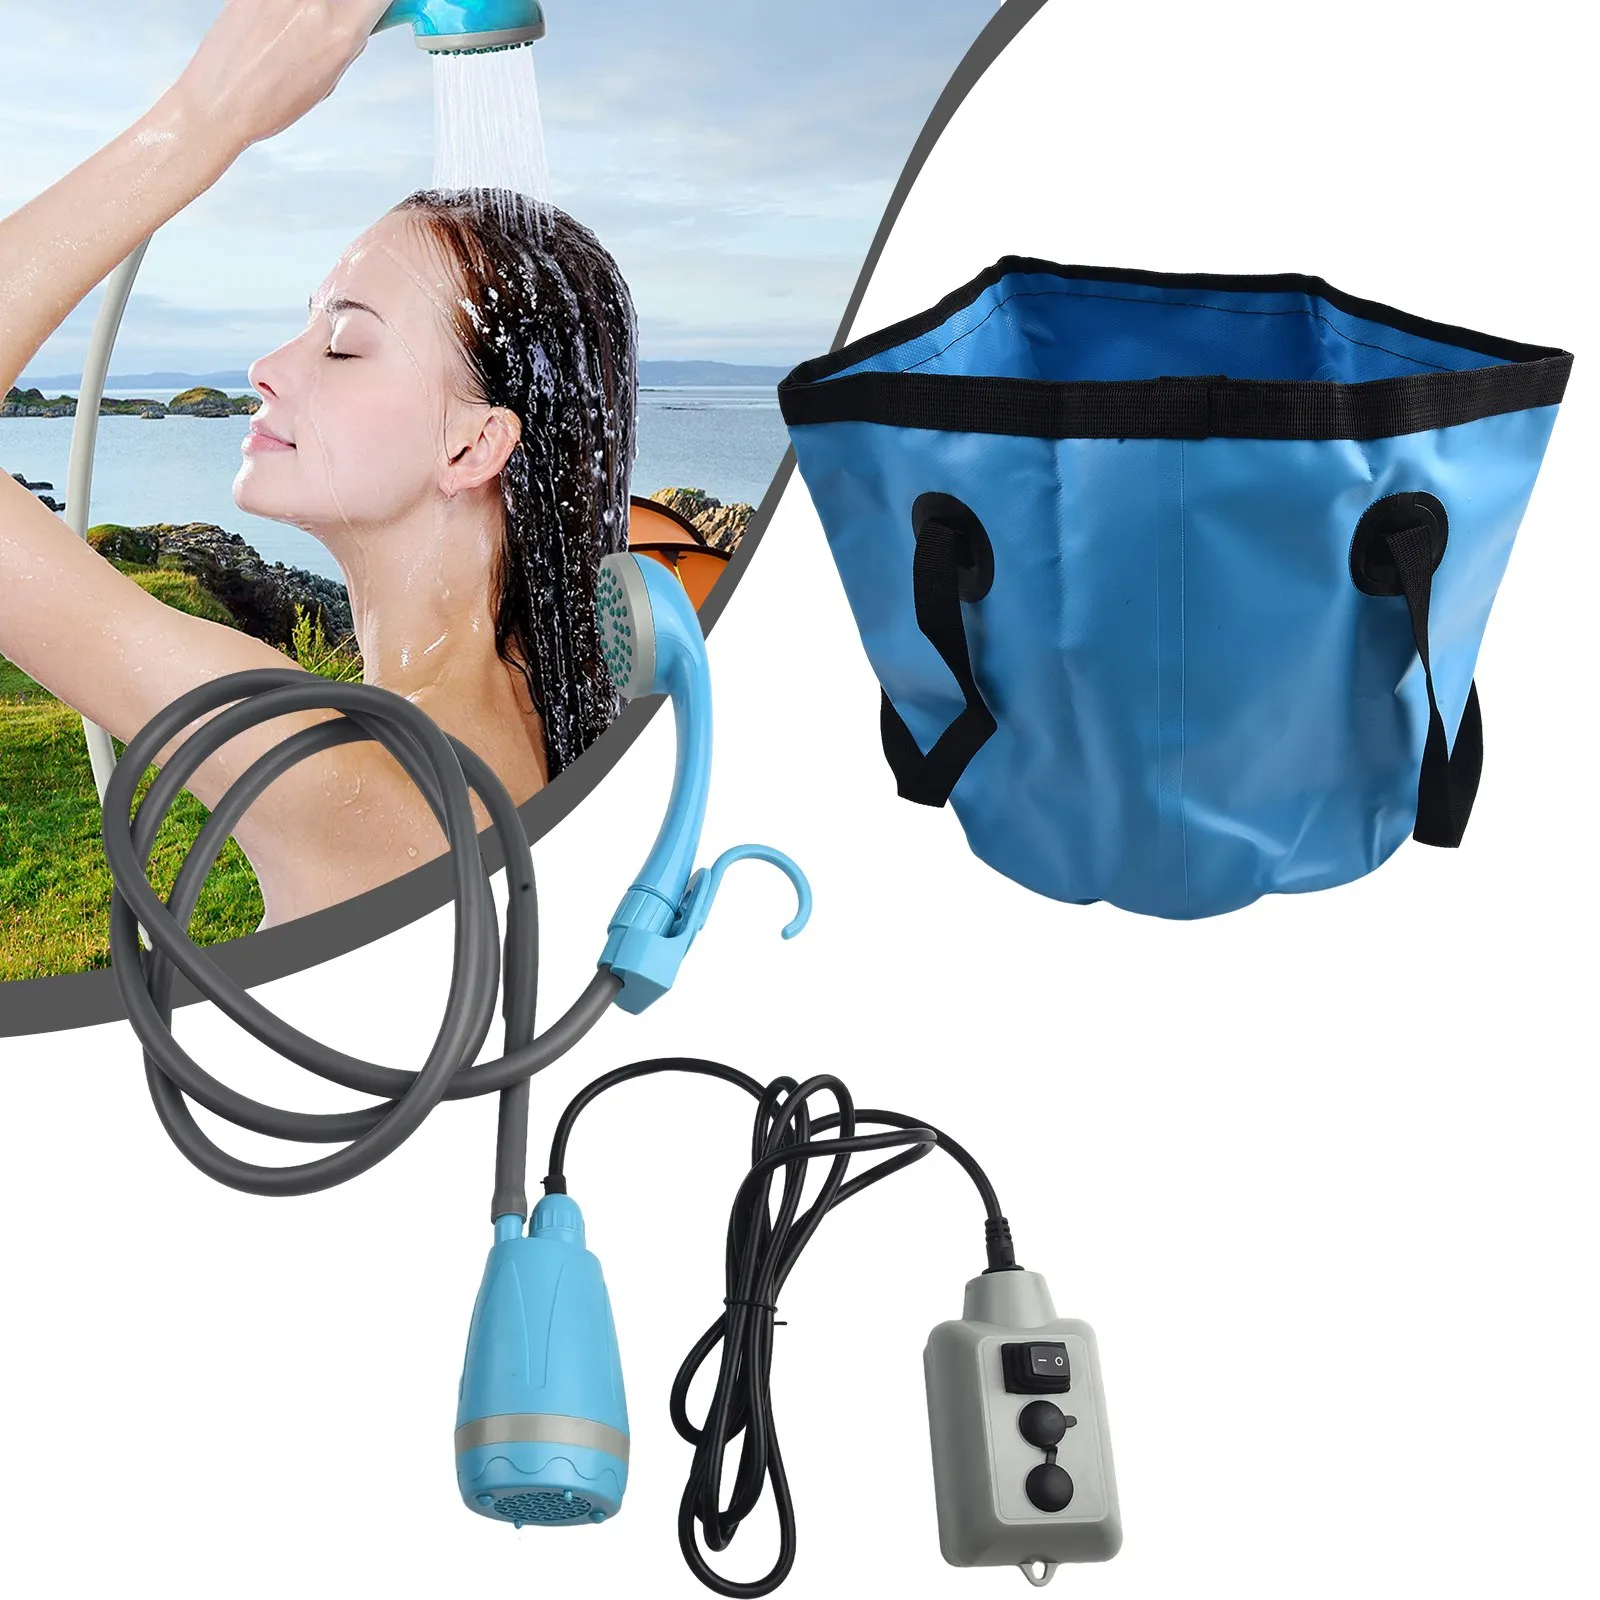 Cleaning tool portable car shower dc 12v car washer outdoor camping travel shower with thumb200